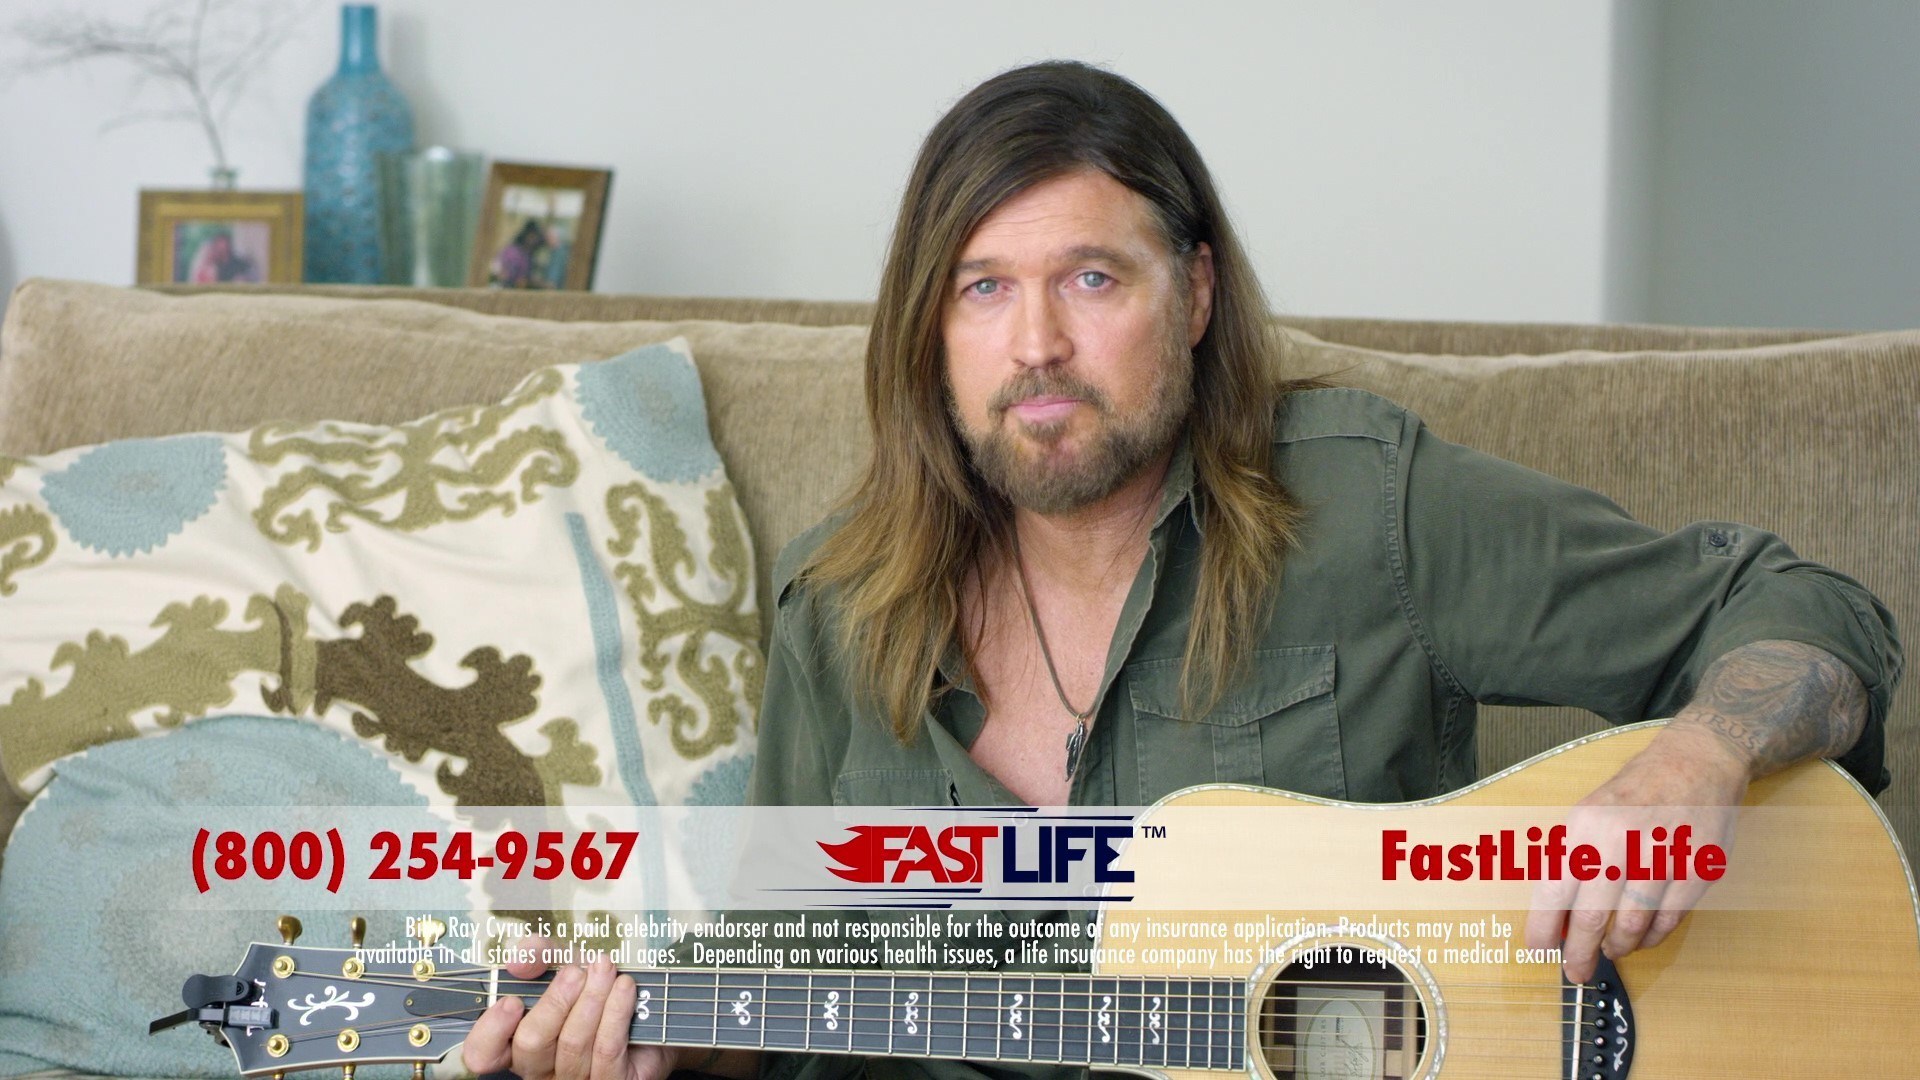 Billy Ray Cyrus was named a FastLife spokesman in 2018. 